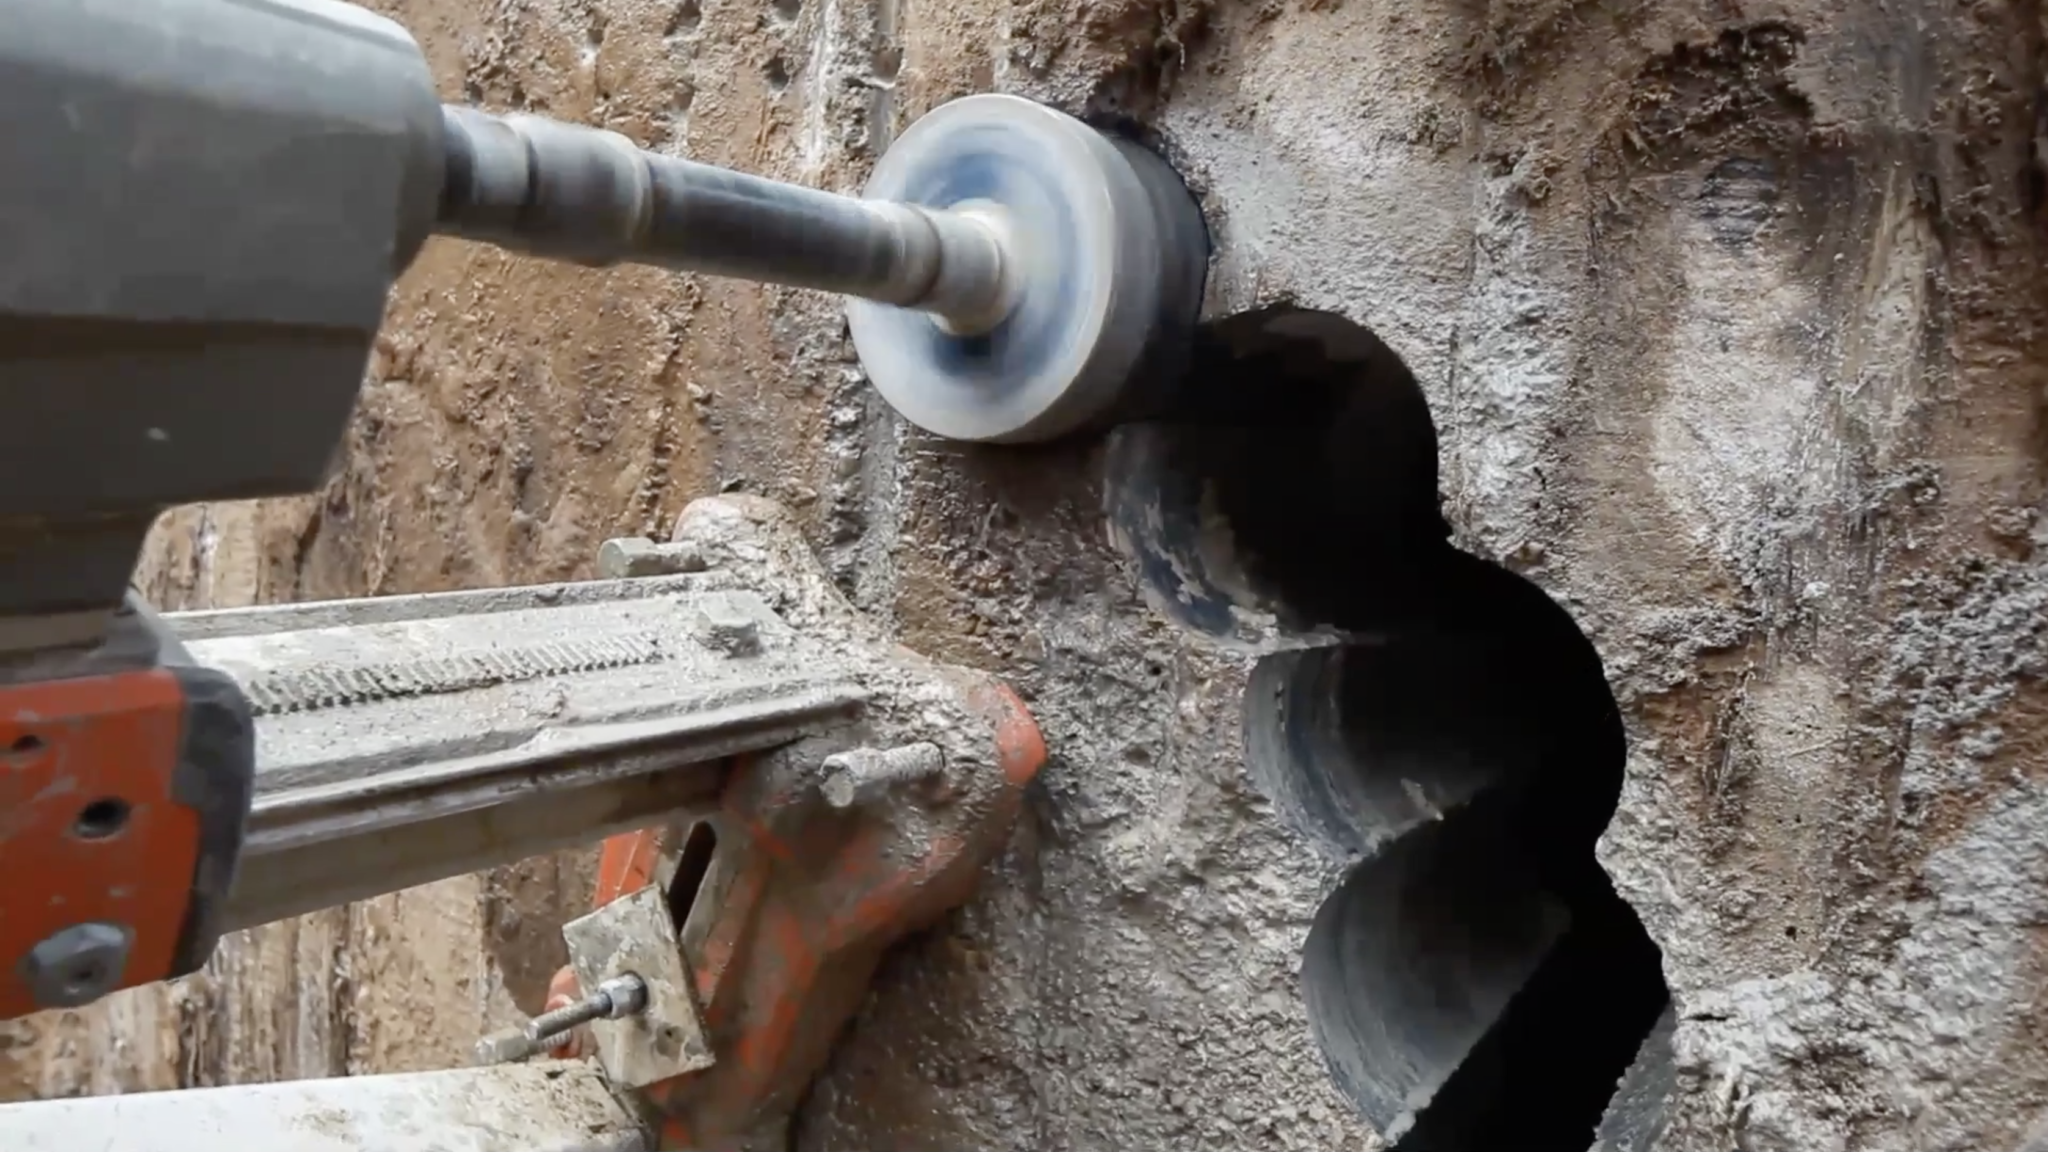 In-situ Concrete Compressive Strength Assessment - Cores and